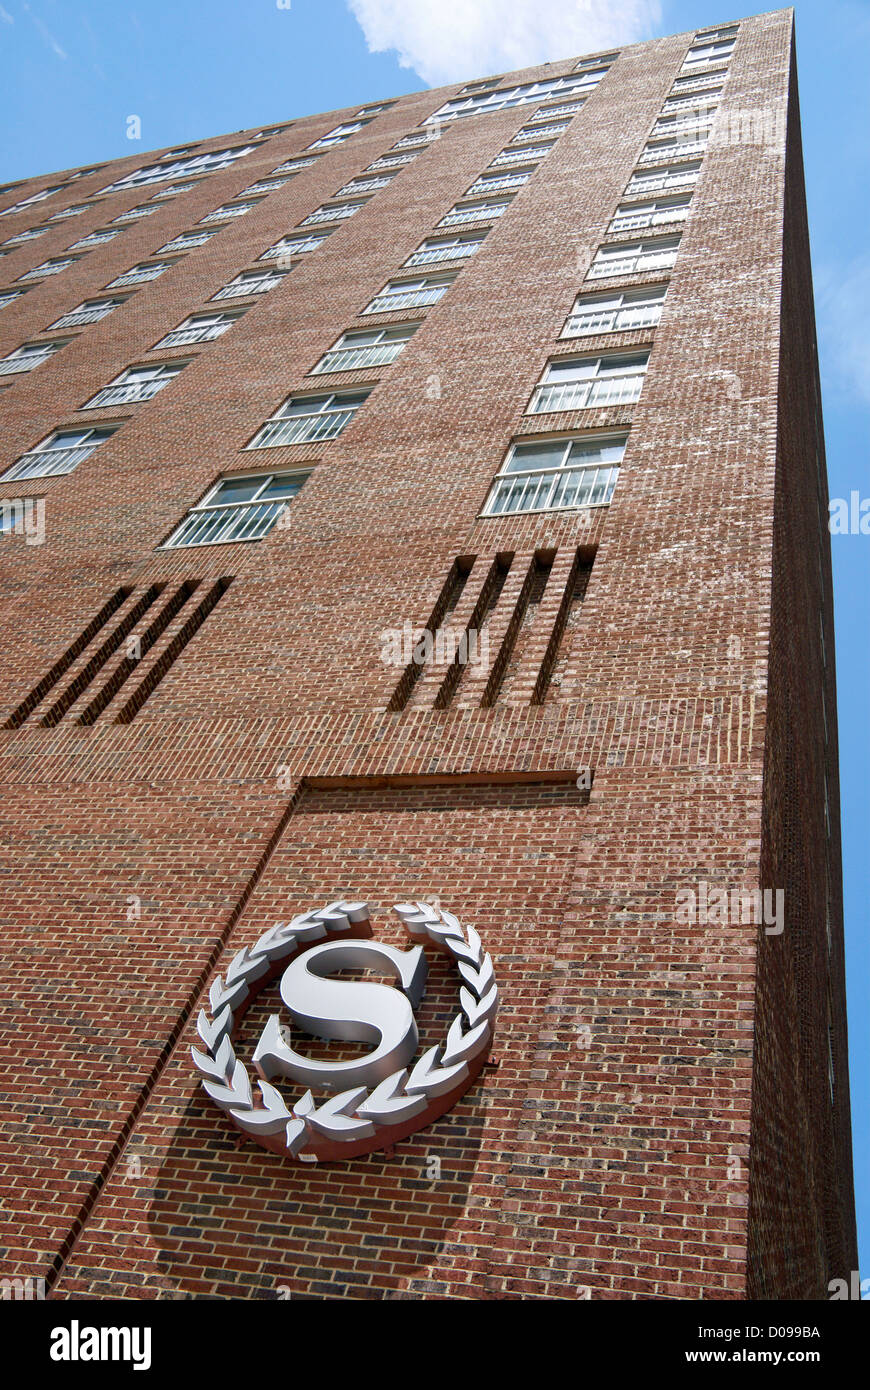 Sheraton hotel in downtown Raleigh, North Carolina. Tall red brick building. Stock Photo